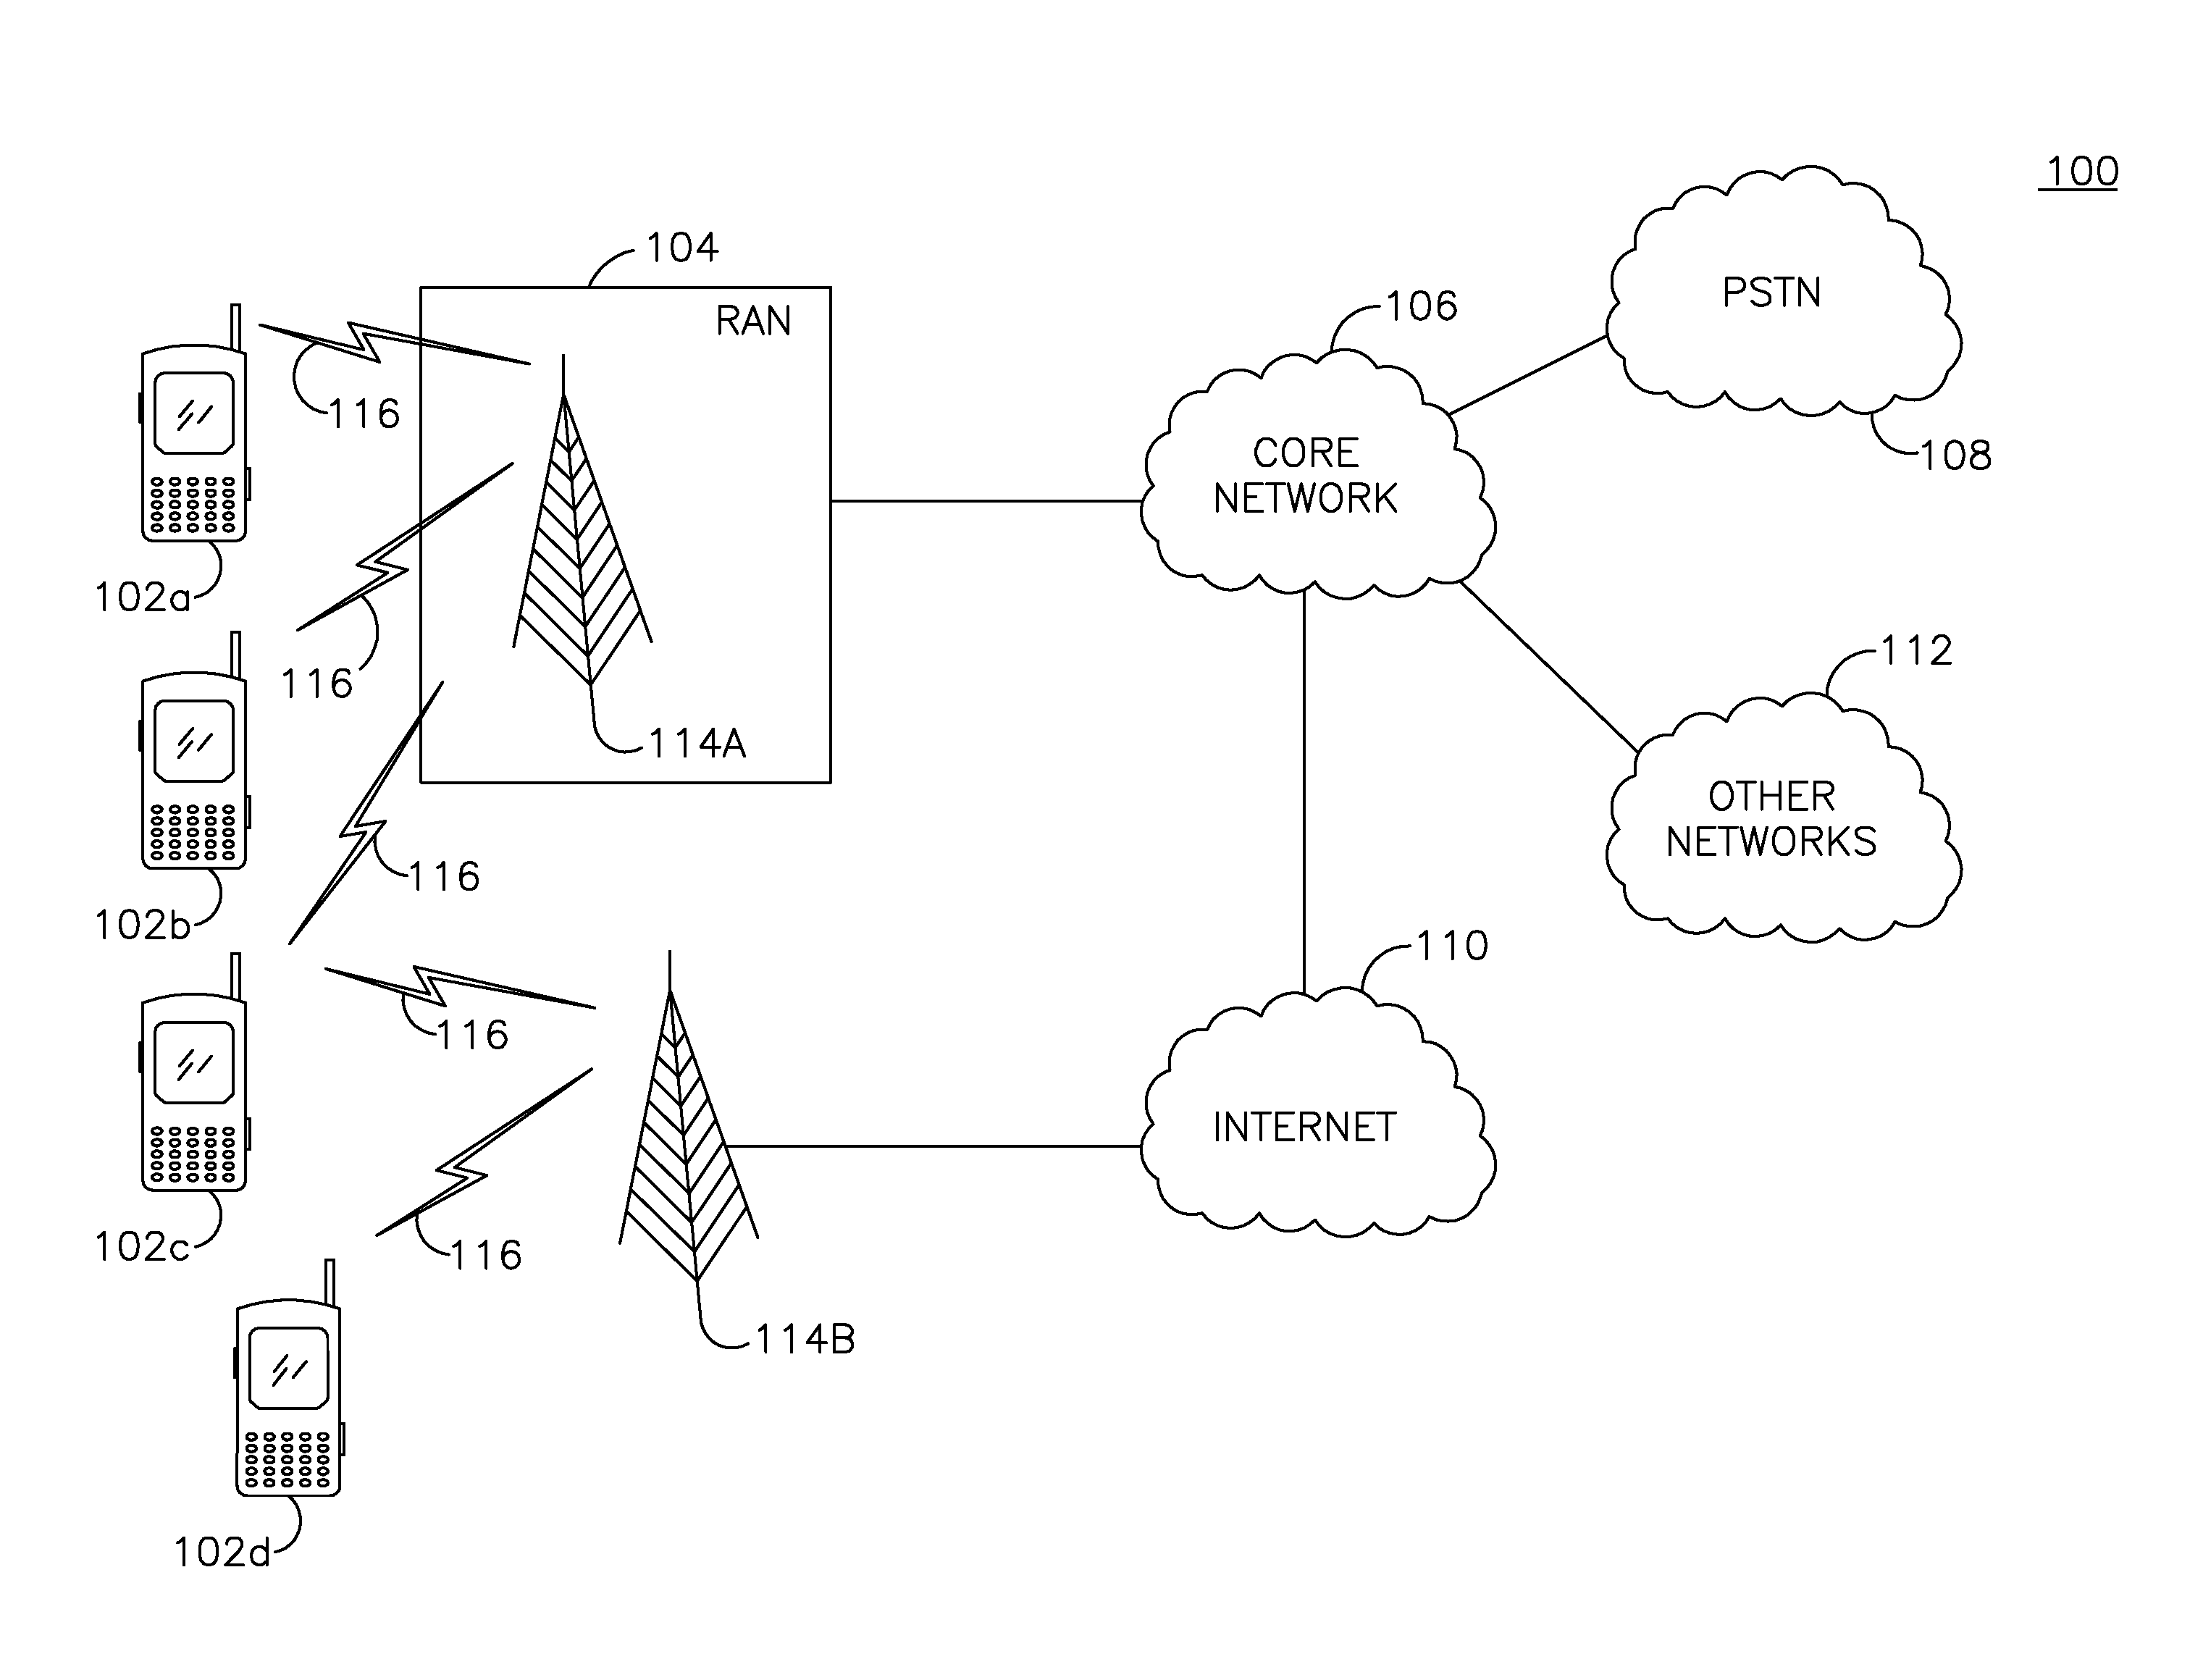 Power control for devices having multiple antennas